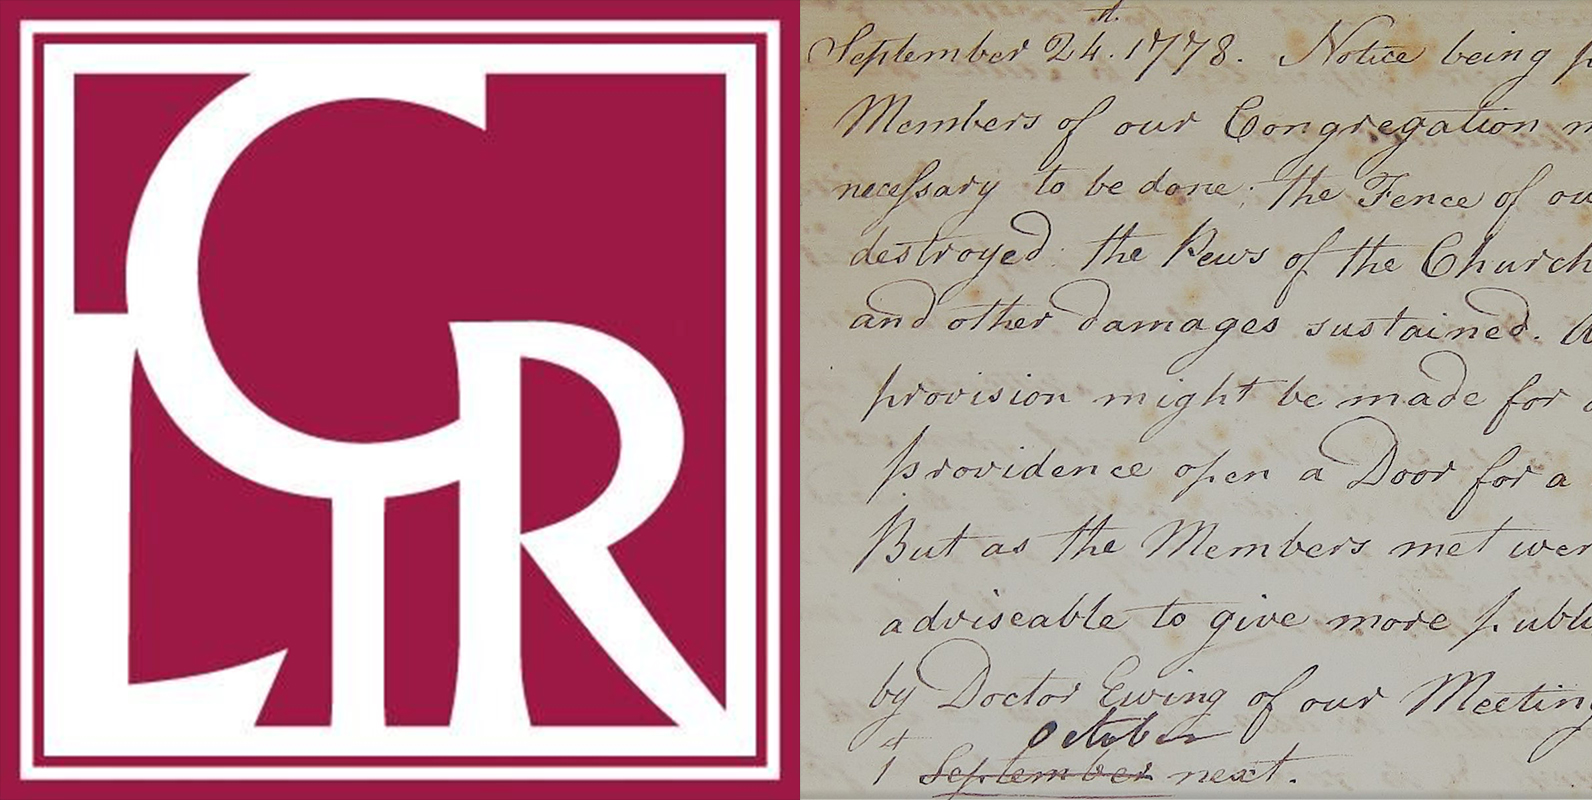 CLIR logo and session minutes from Second Presbyterian Church, Philadelphia, PA, 1778.